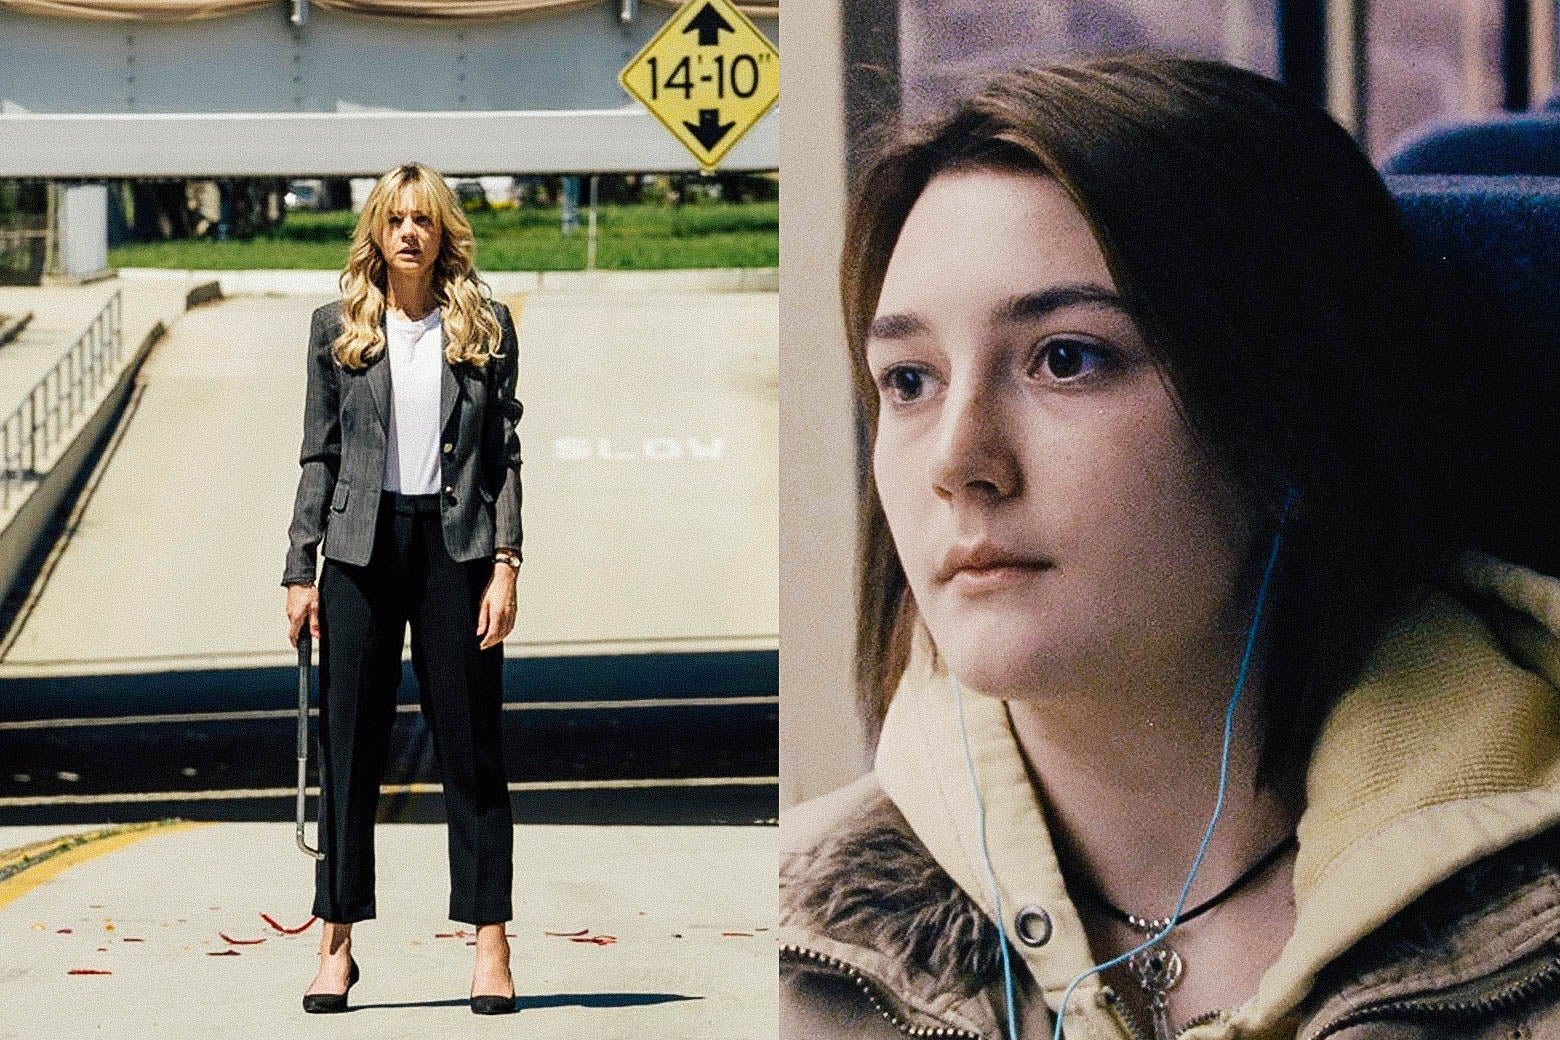 Left: Carey Mulligan stands holding a metal stick. Right: a close-up of Sidney Flanigan wearing earbuds on a train or bus.